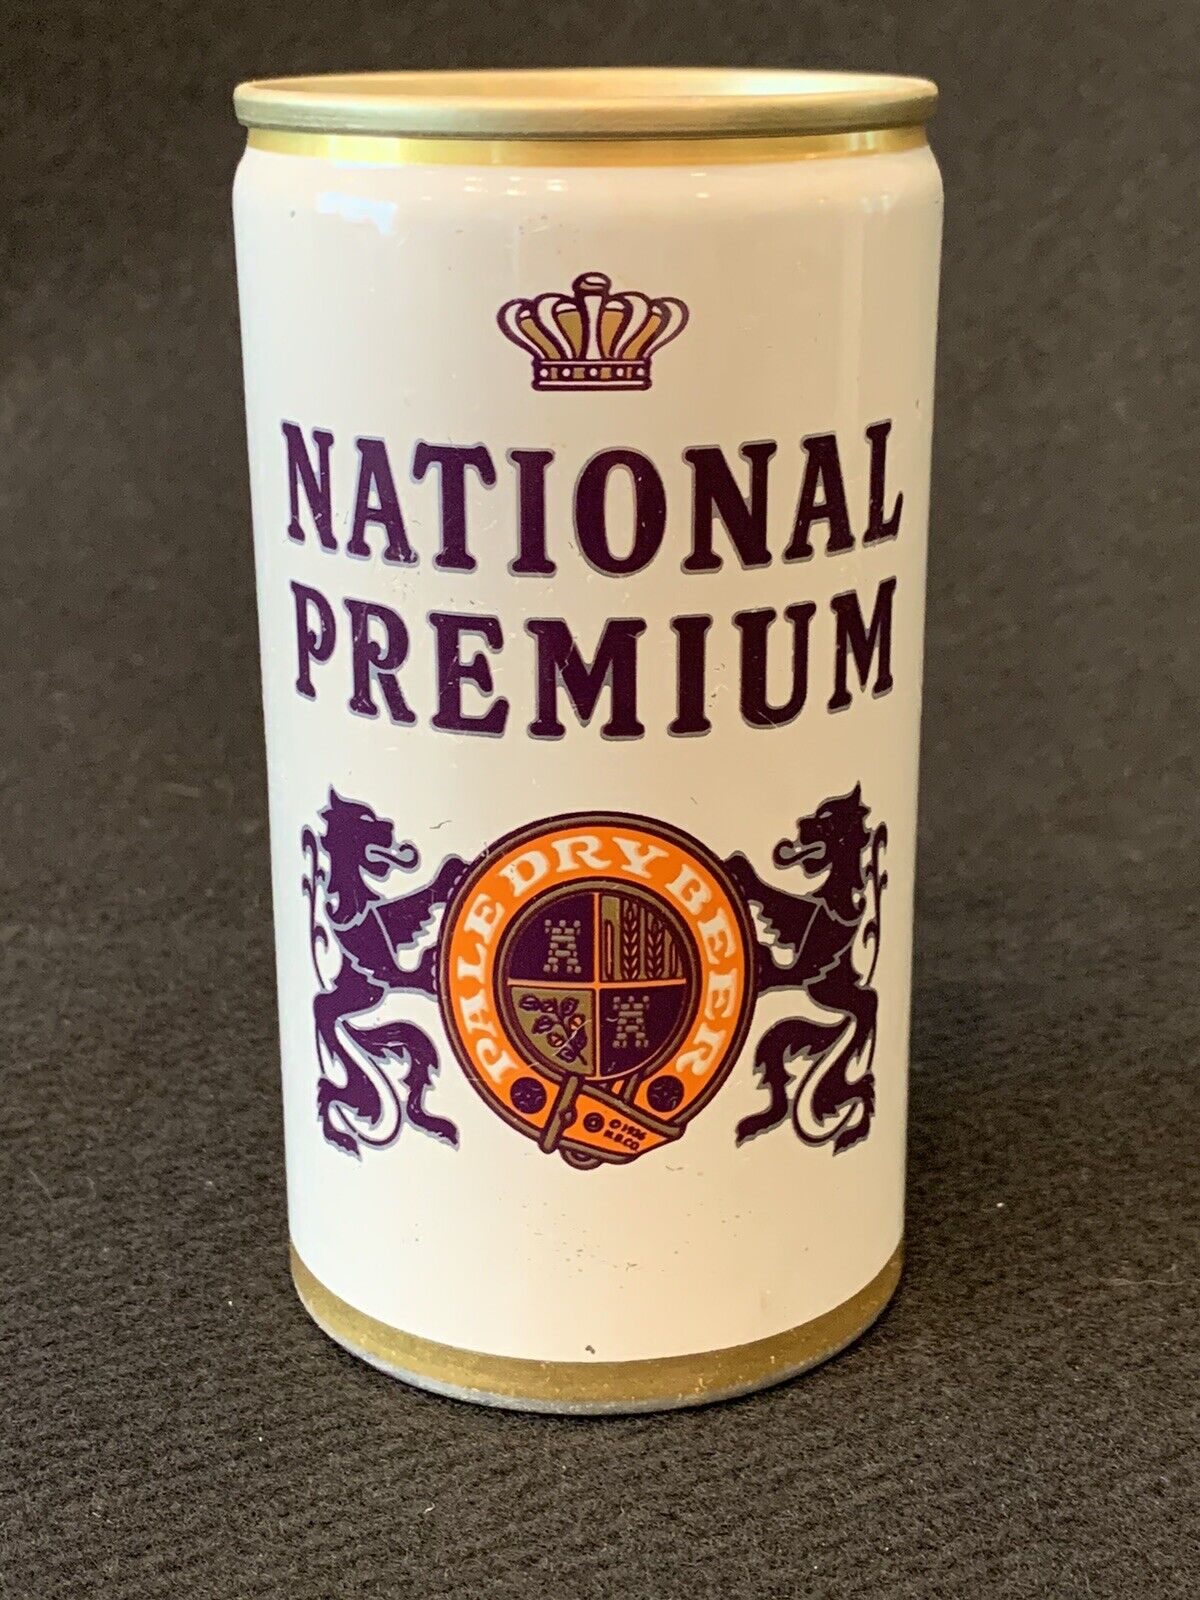 1970s NATIONAL PREMIUM BEER CAN - BOTTOM OPENED - NATIONAL BREWING BALTIMORE, MD